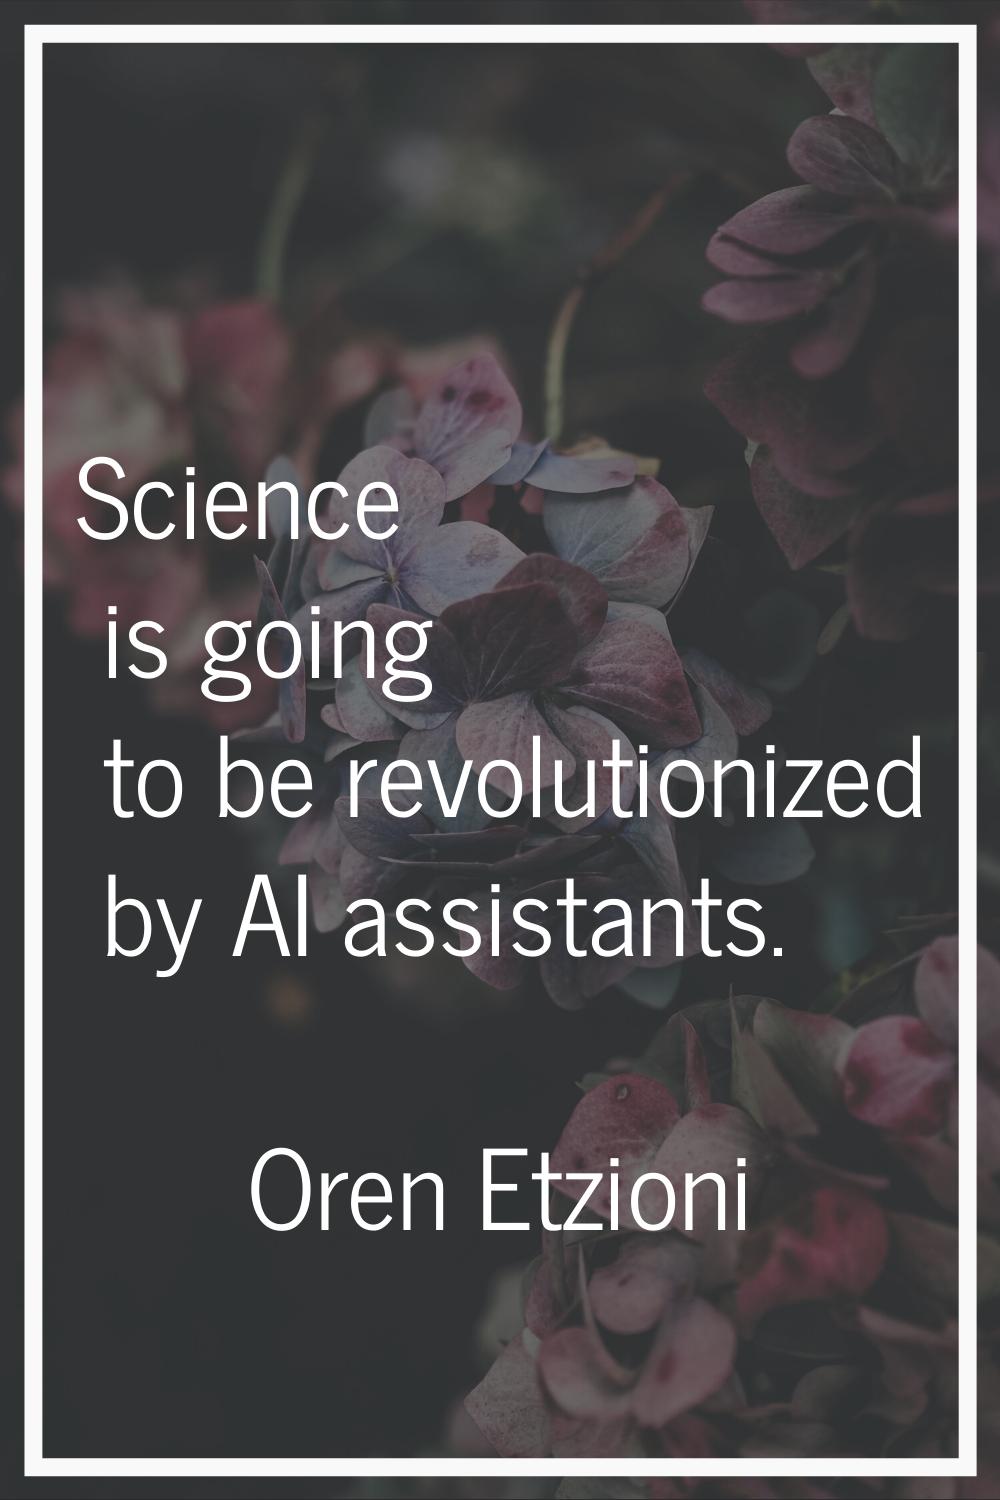 Science is going to be revolutionized by AI assistants.